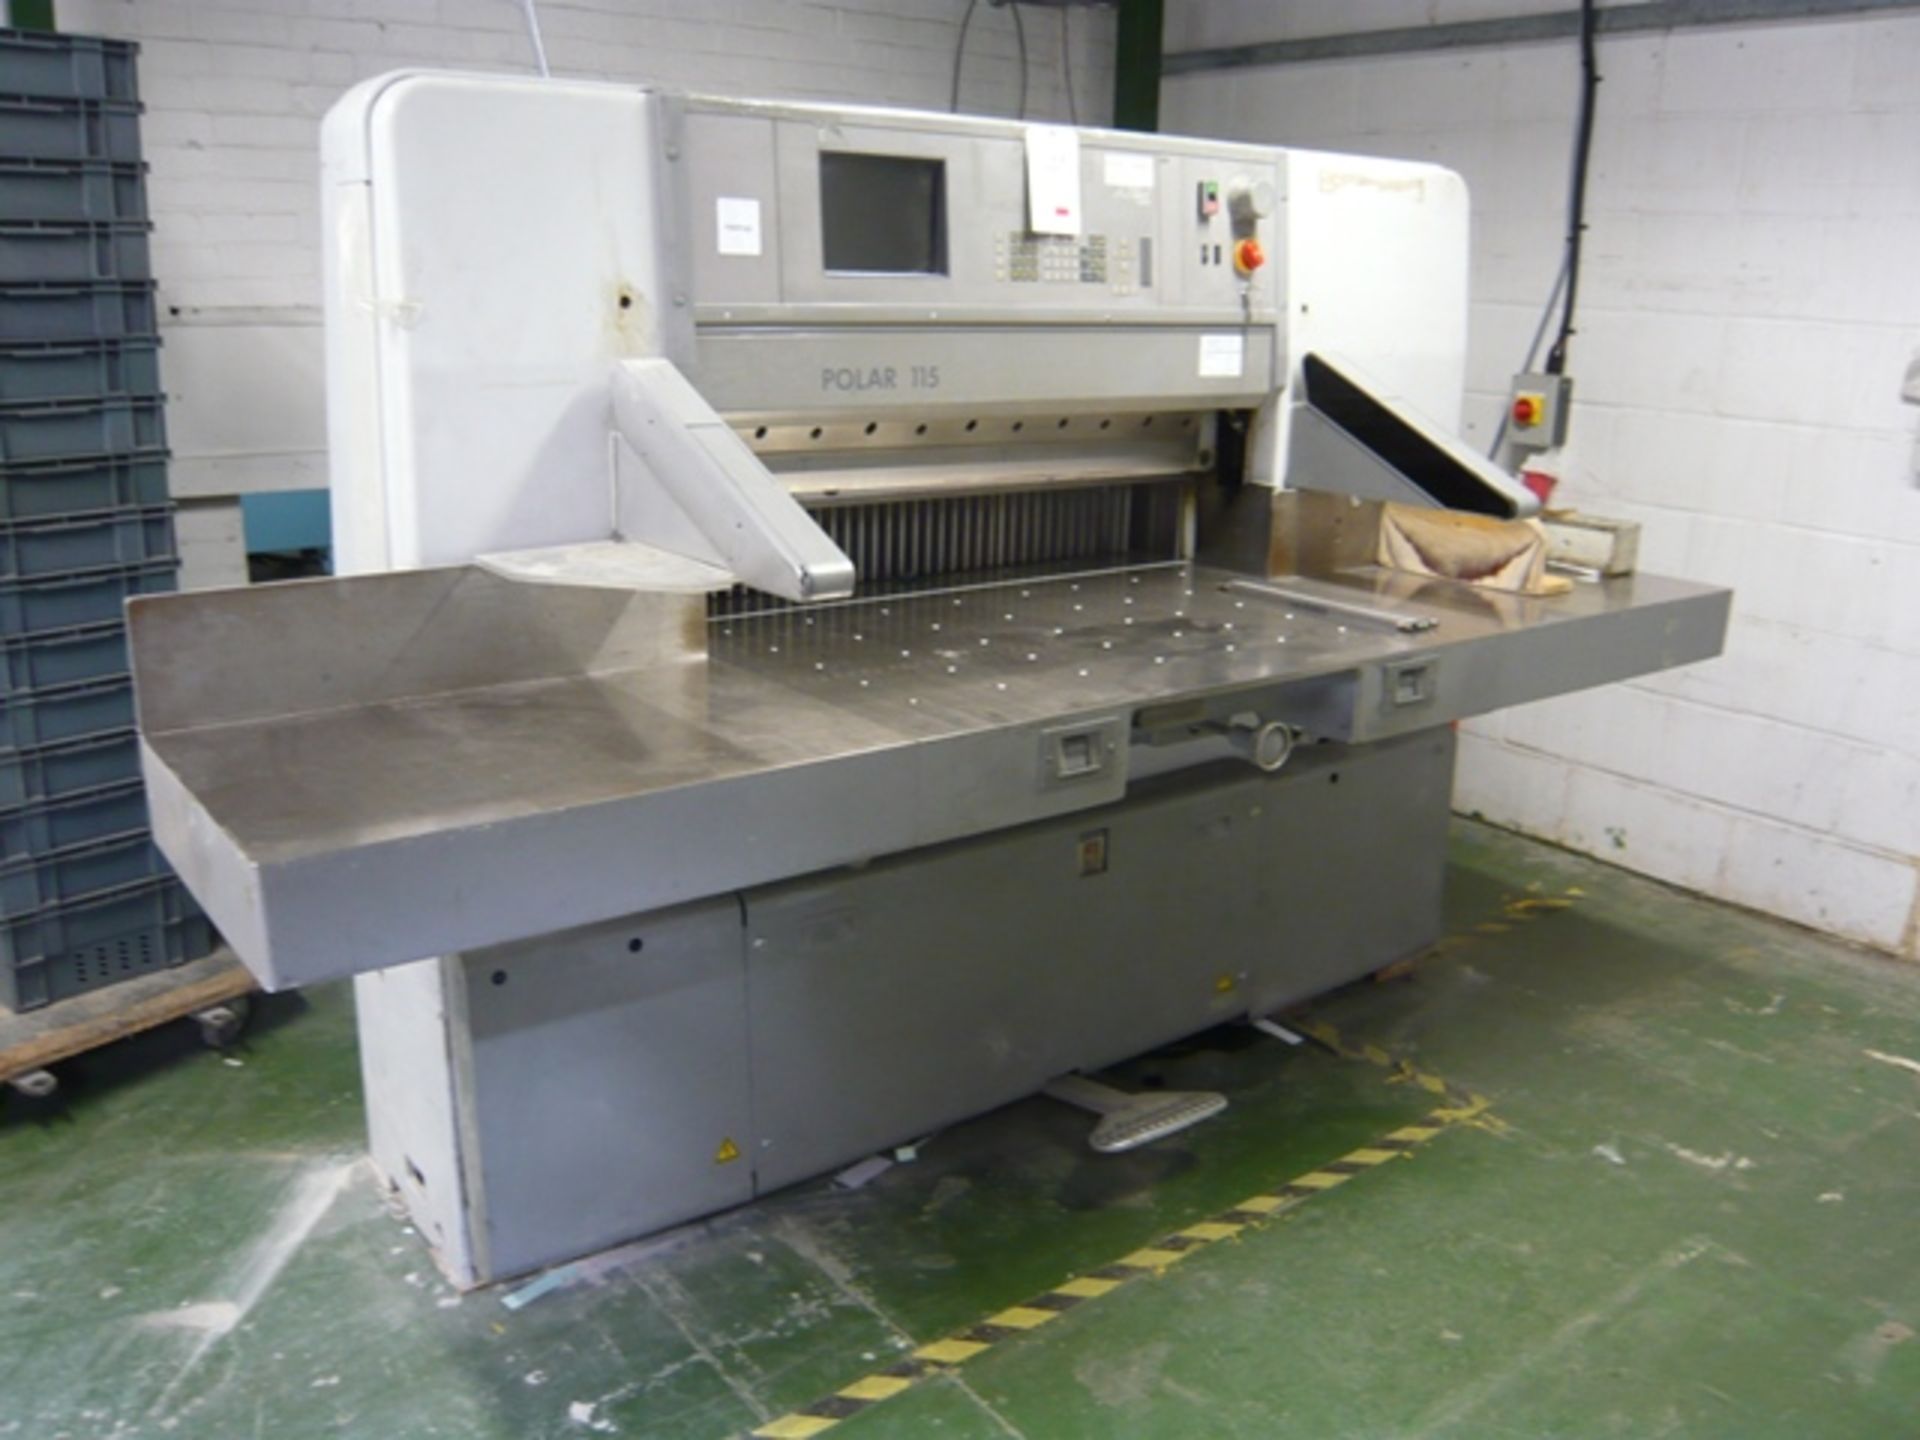 Polar Mohr model 115E programmable guillotine, with 3 part divided back gauge, Air float tables to